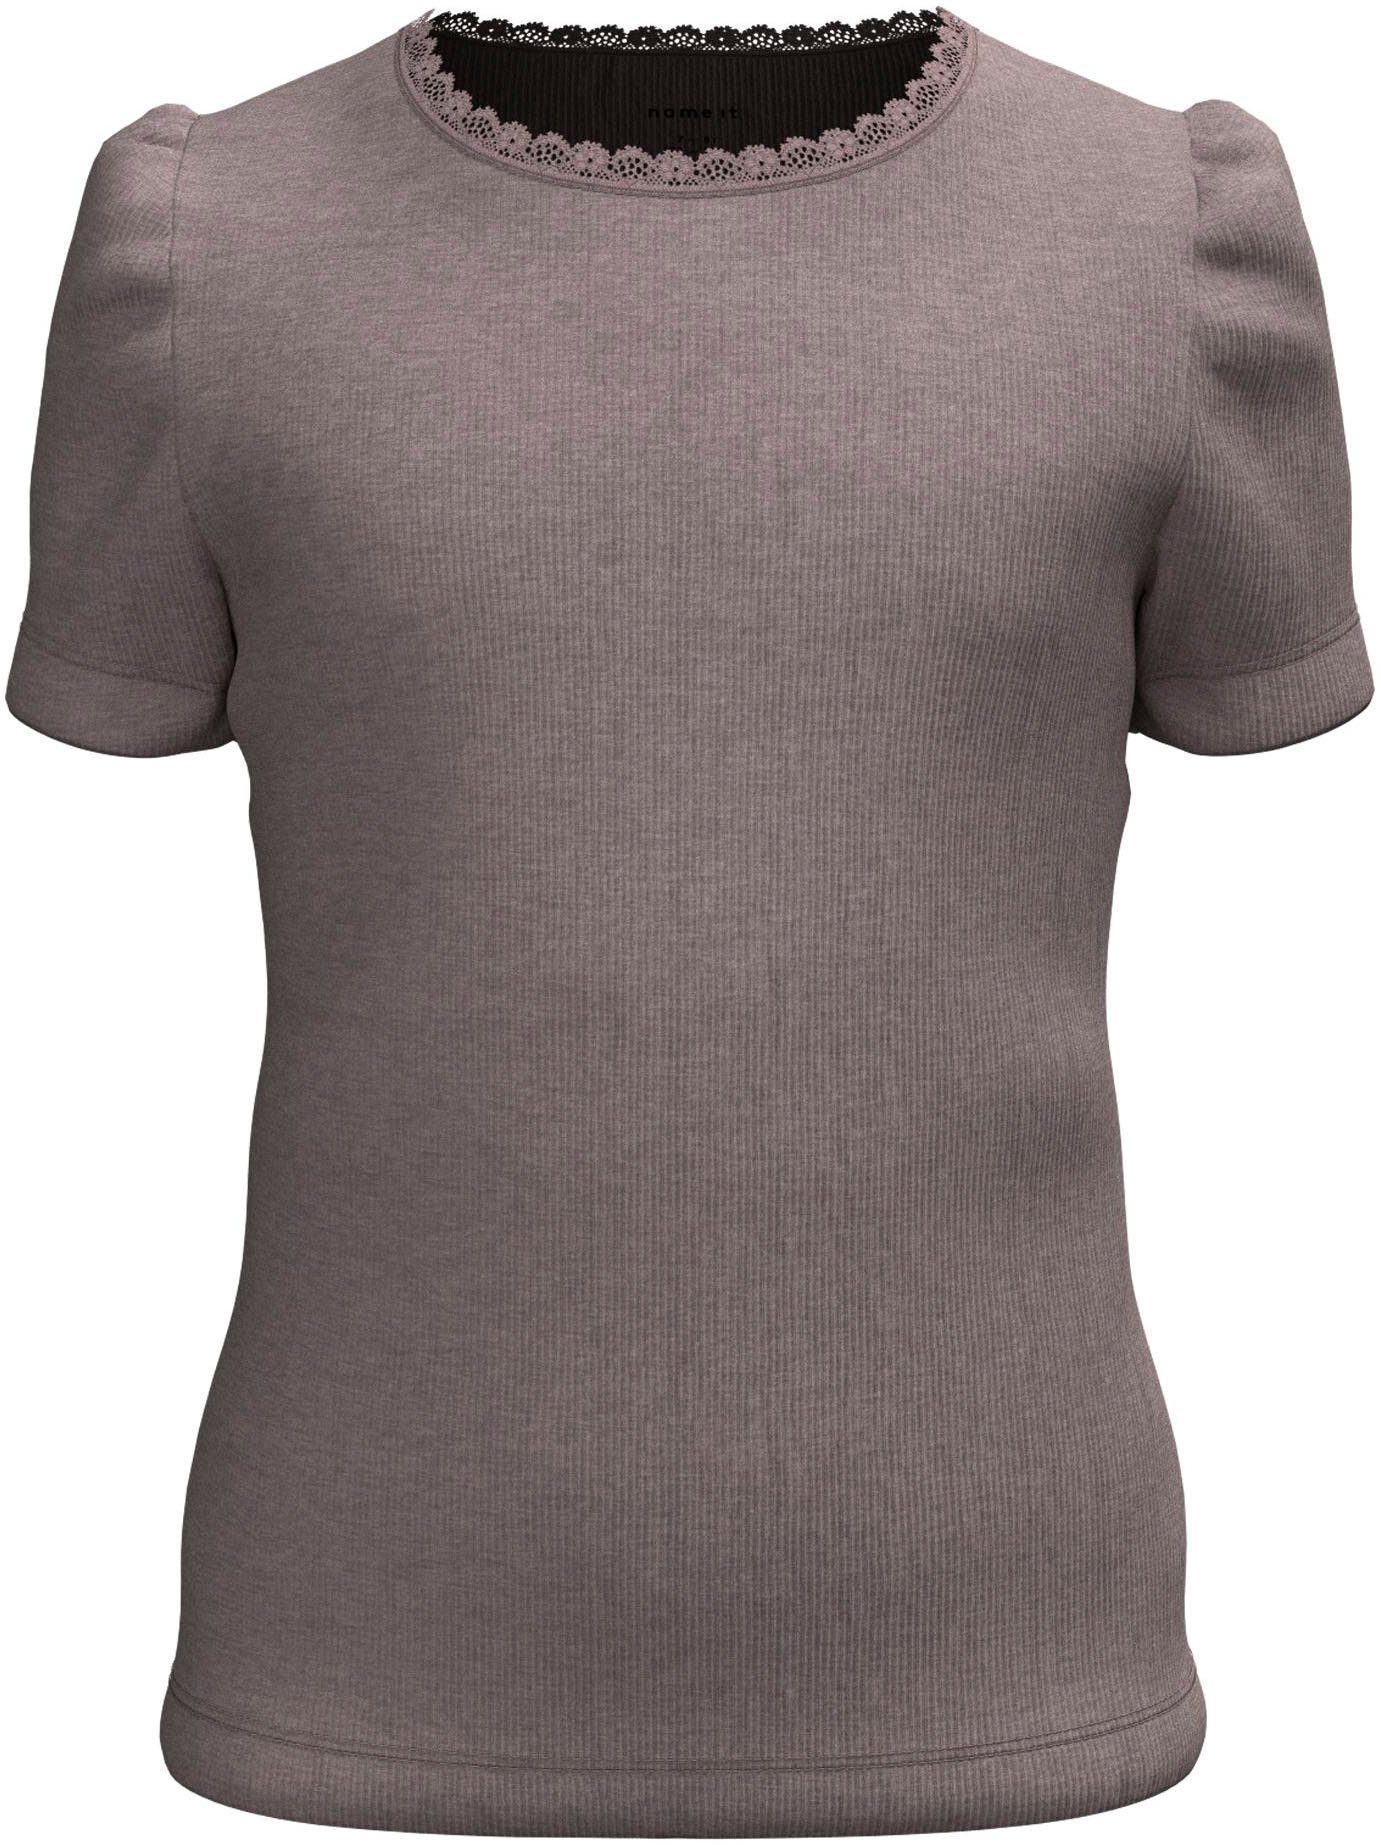 Shirttop SS It NOOS TOP Name NMFKAB deauville mauve